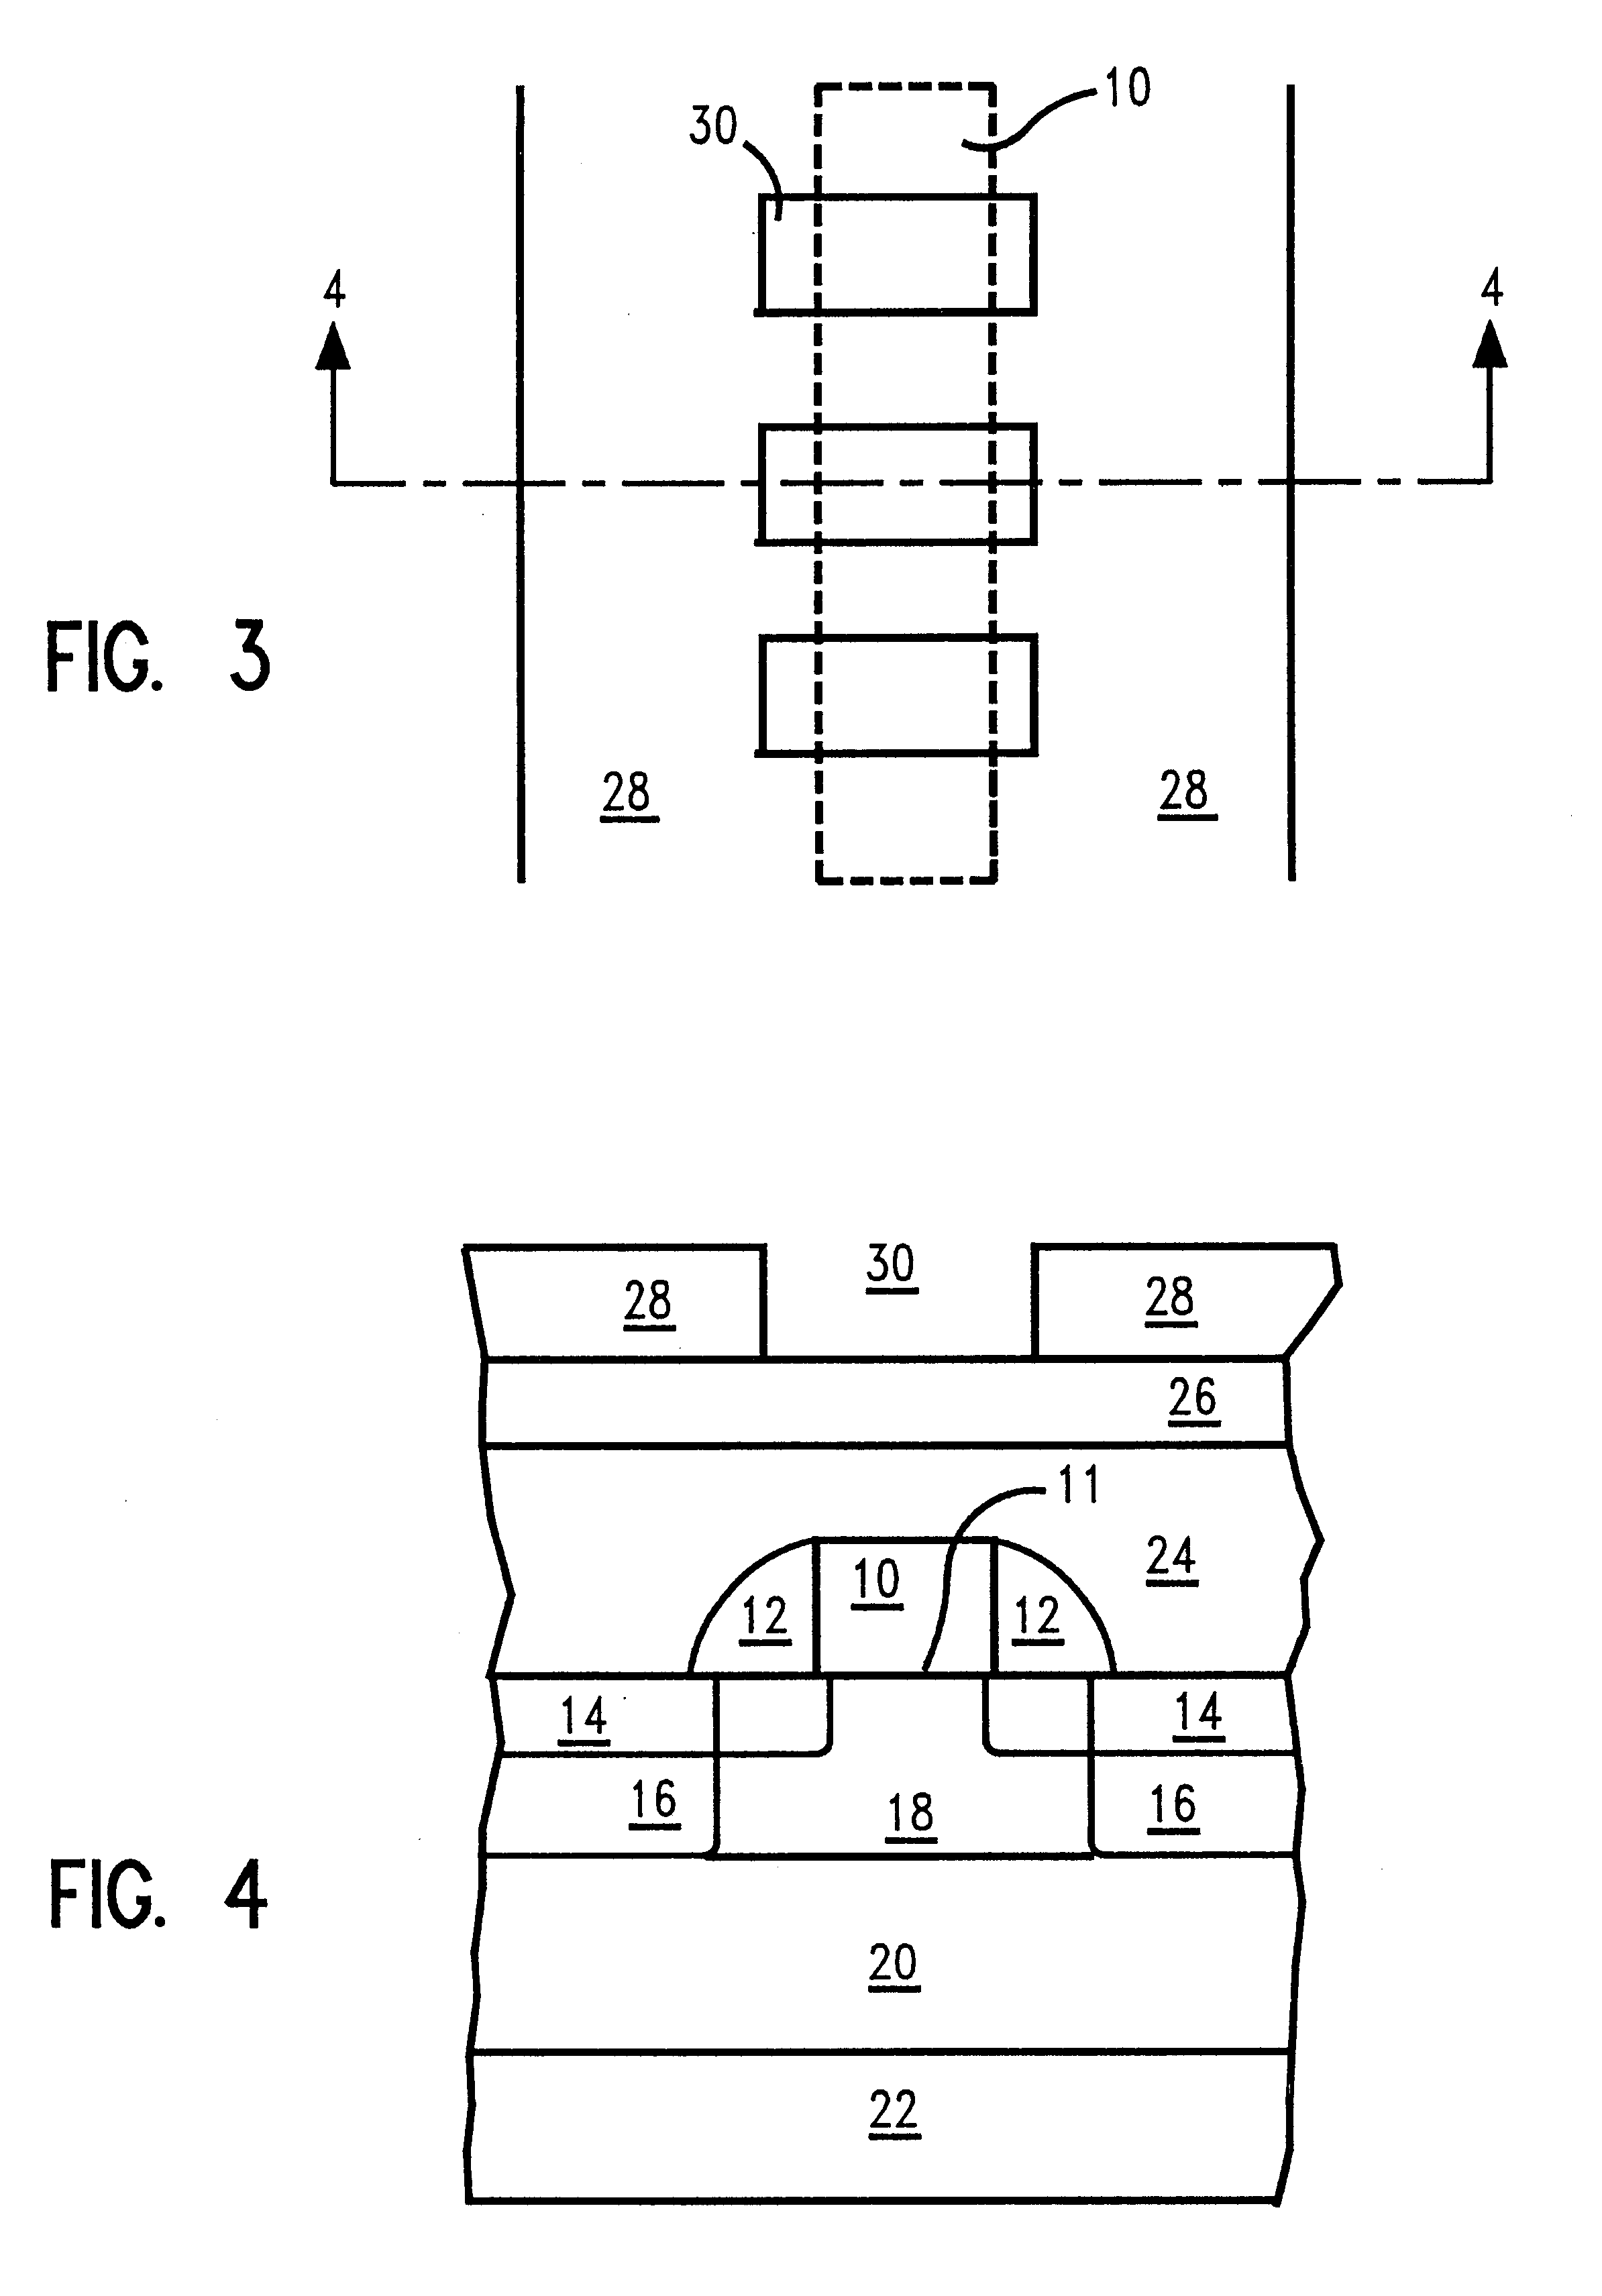 SOI CMOS body contact through gate, self-aligned to source- drain diffusions